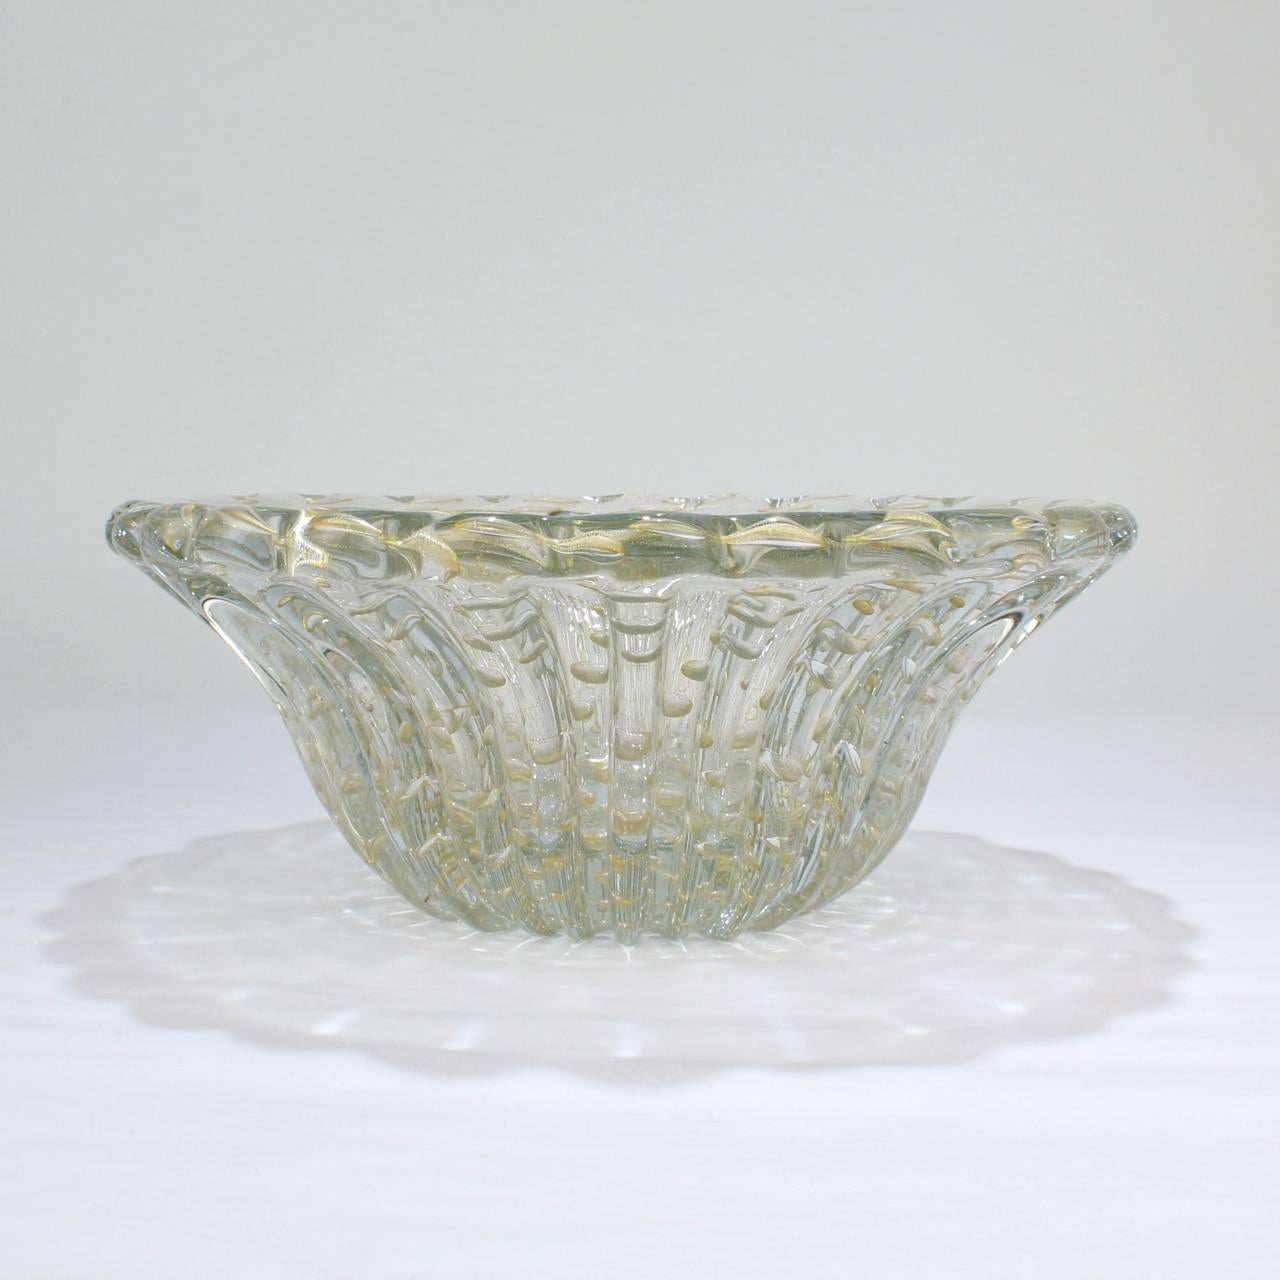 A lovely, large Barovier ribbed Bullicante bowl in clear glass with captured bubbles and gold flake inclusions. 

Of slightly oval form (being just a bit longer than wide).

Simply a great size bowl in a high-quality Mid-Century Modern Italian